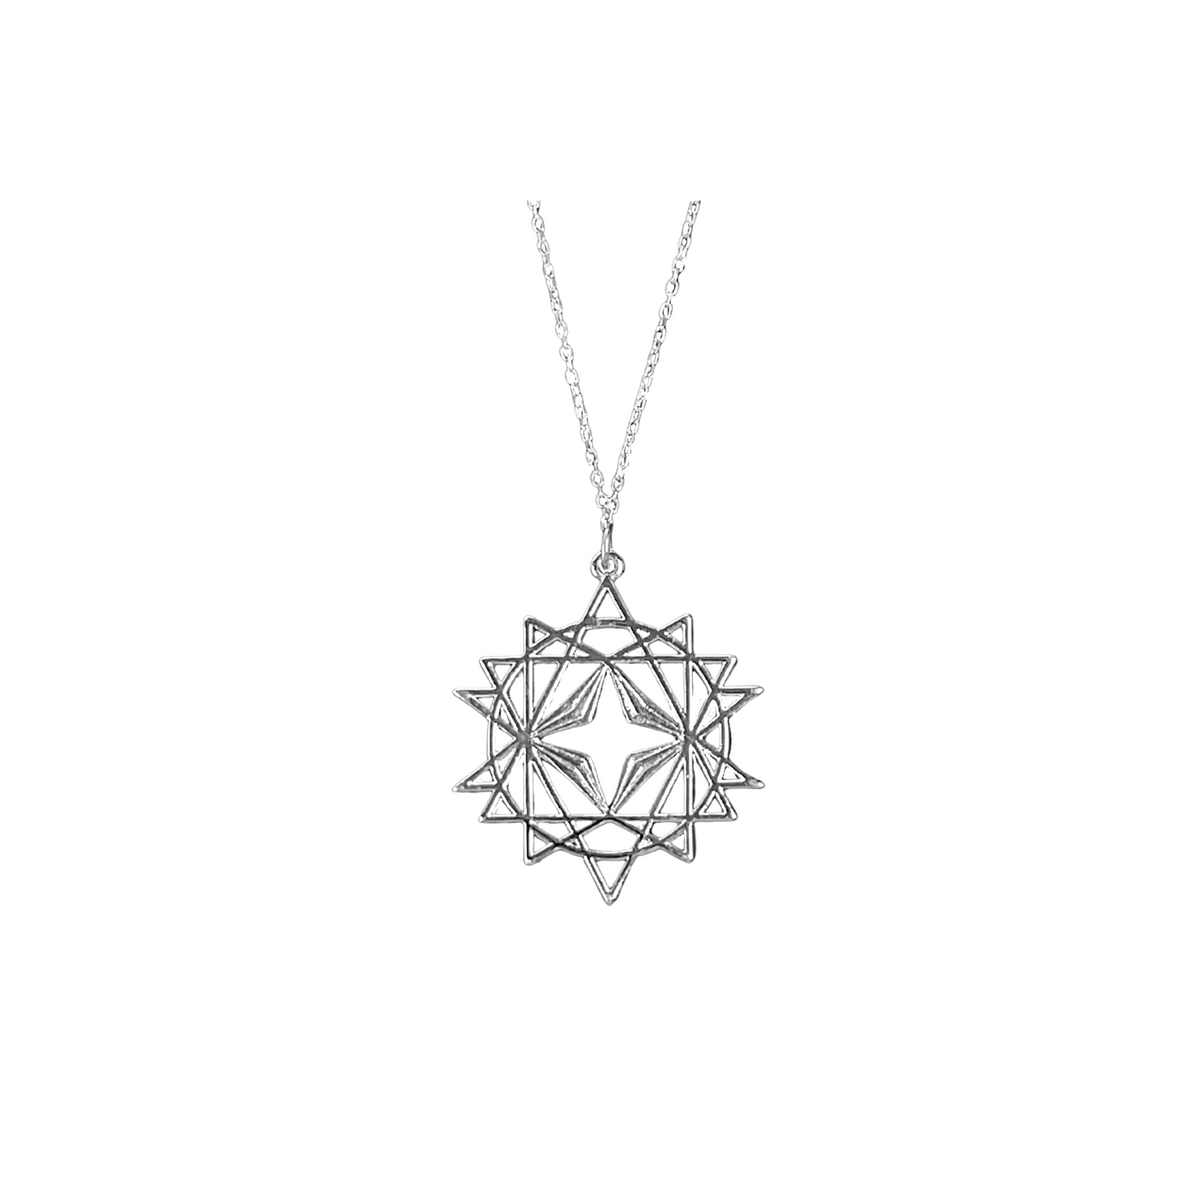 Starseed Necklace Silver